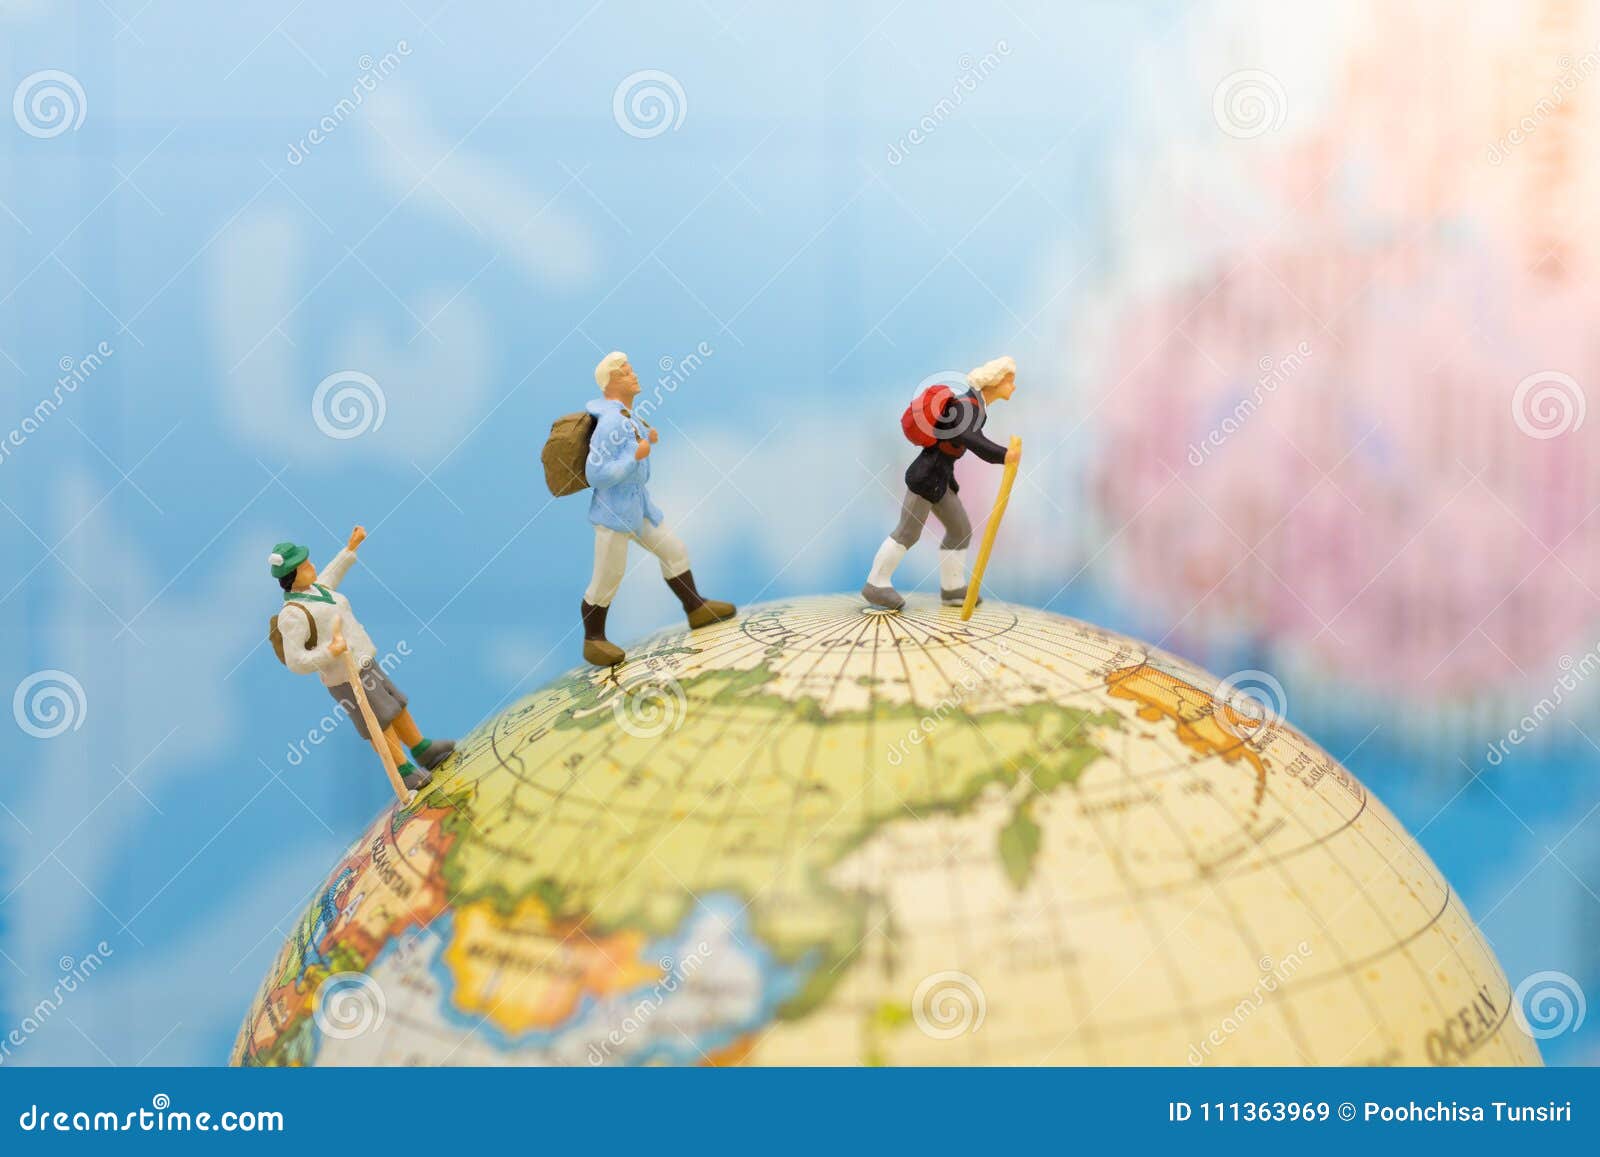 miniature people: group traveler backpack stand and walking on world map. image use for travelling or business trip concept